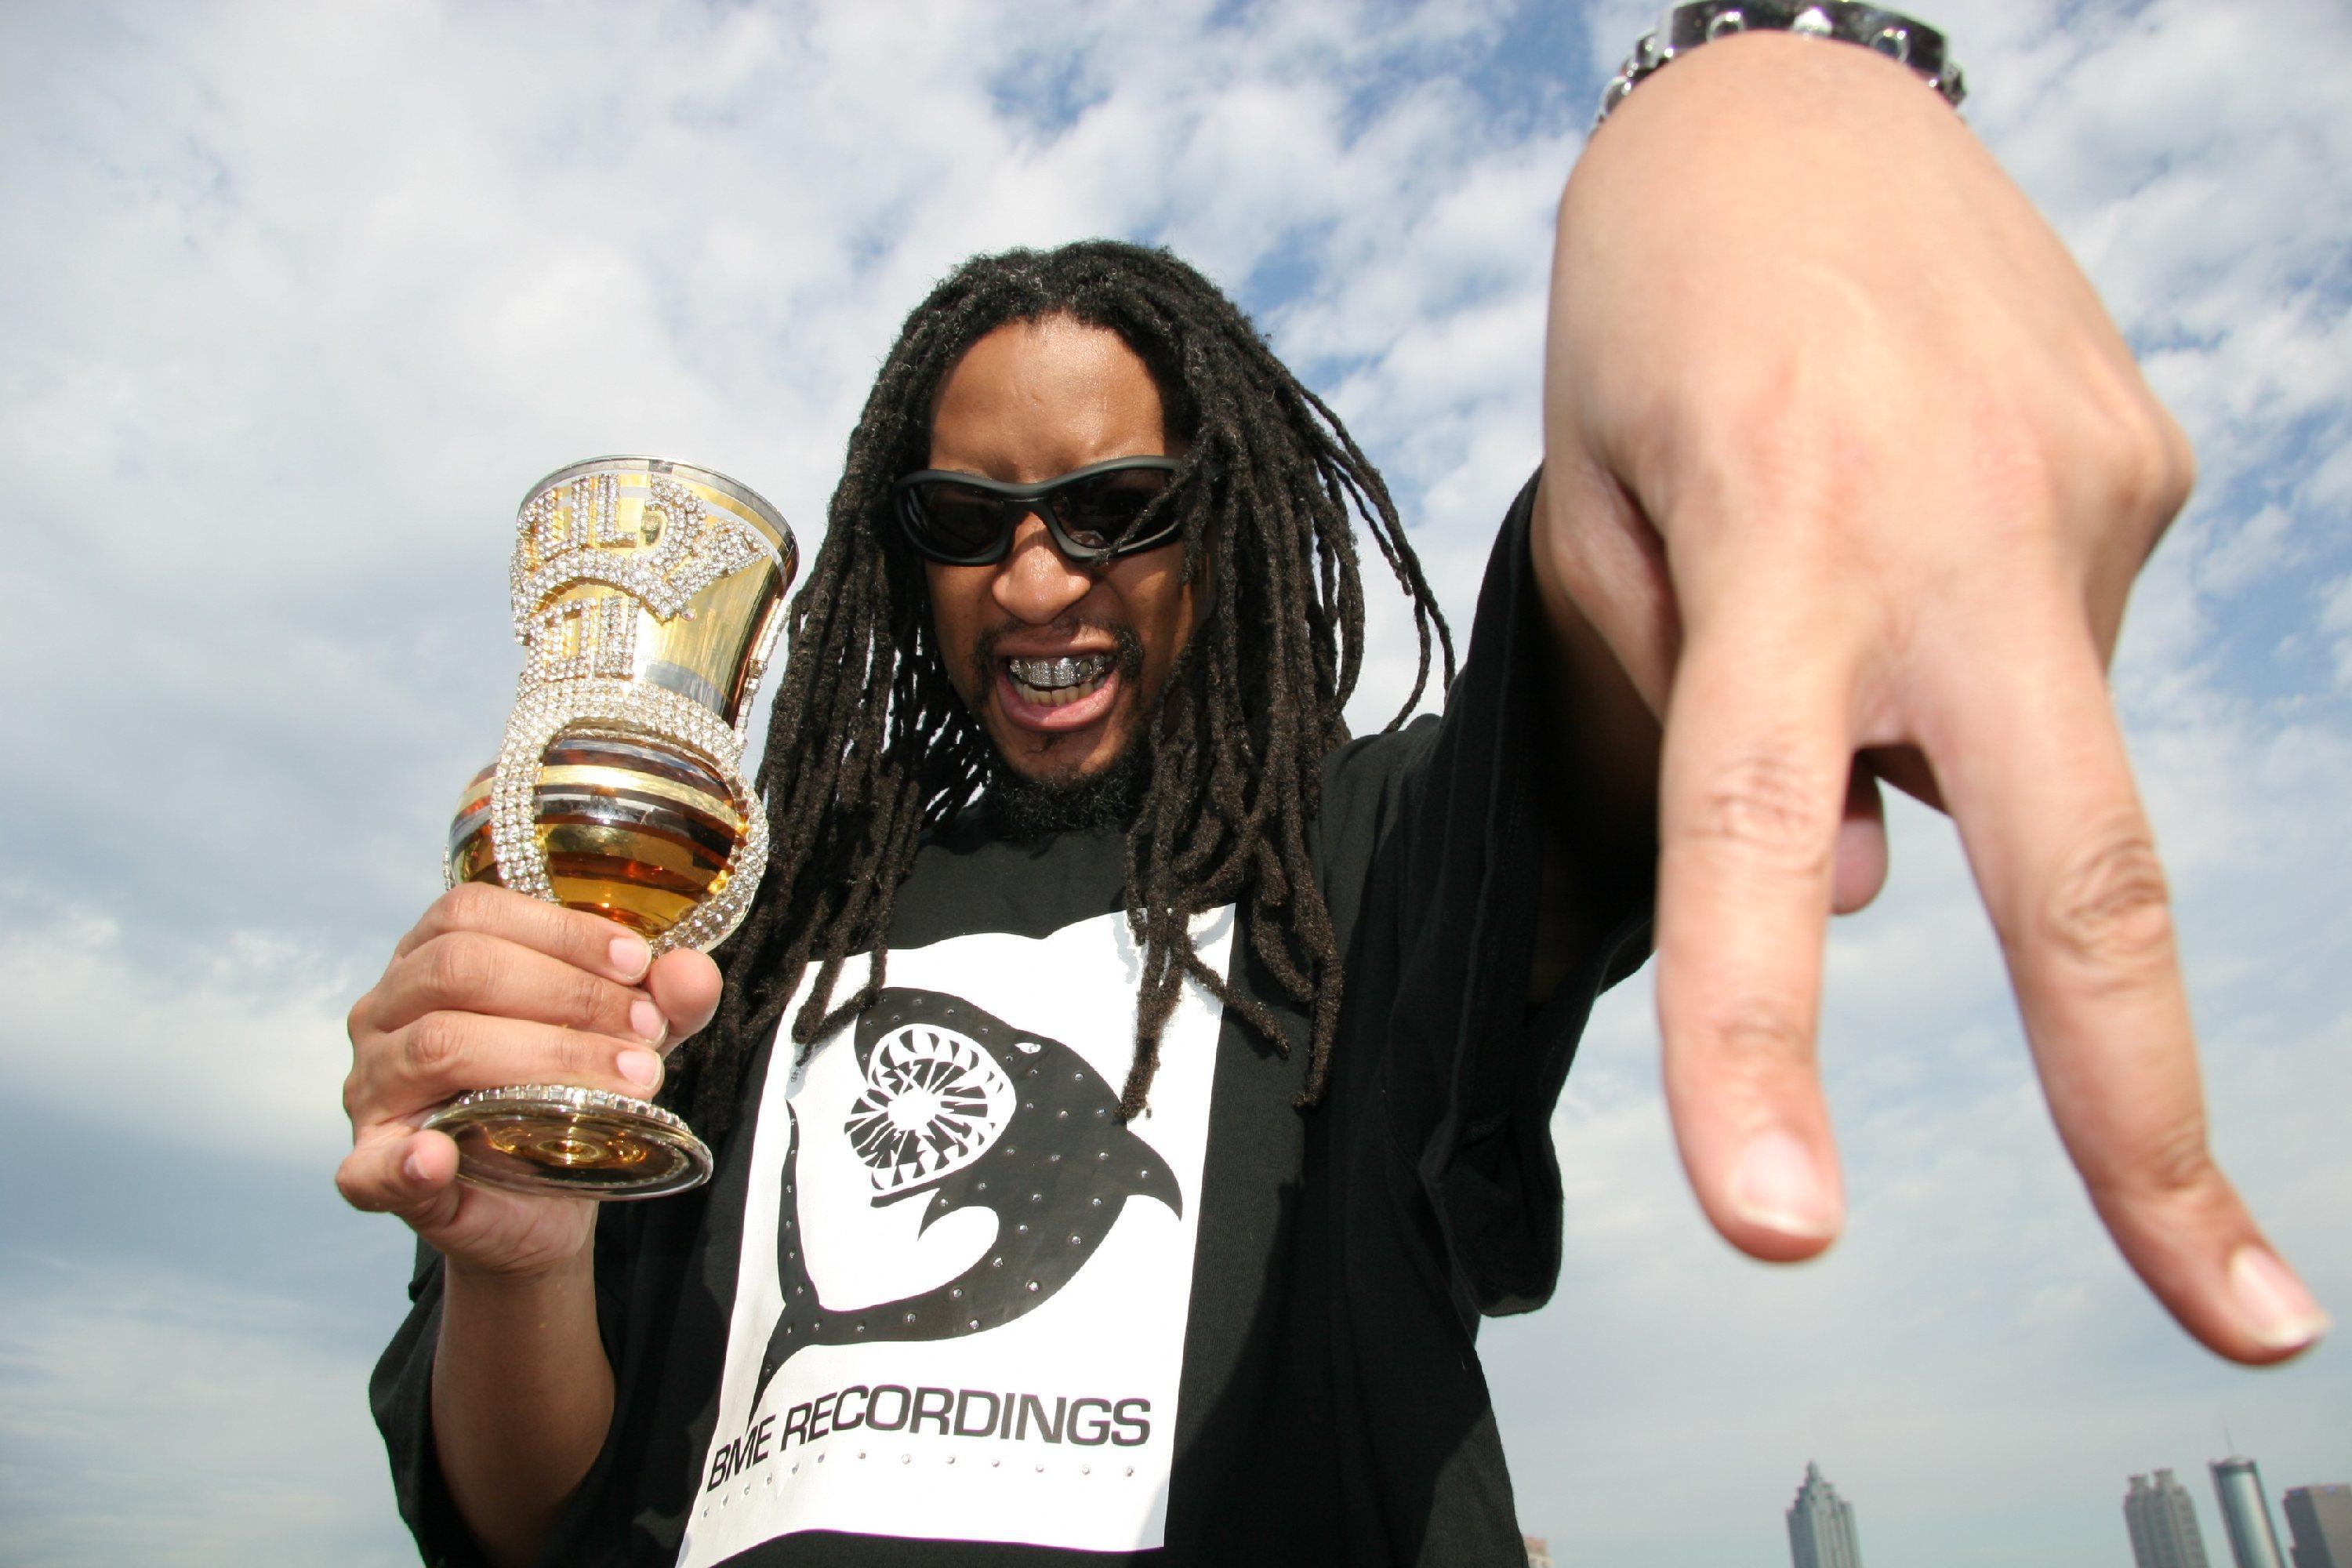 Lil Jon Wallpaper Image Photo Picture Background